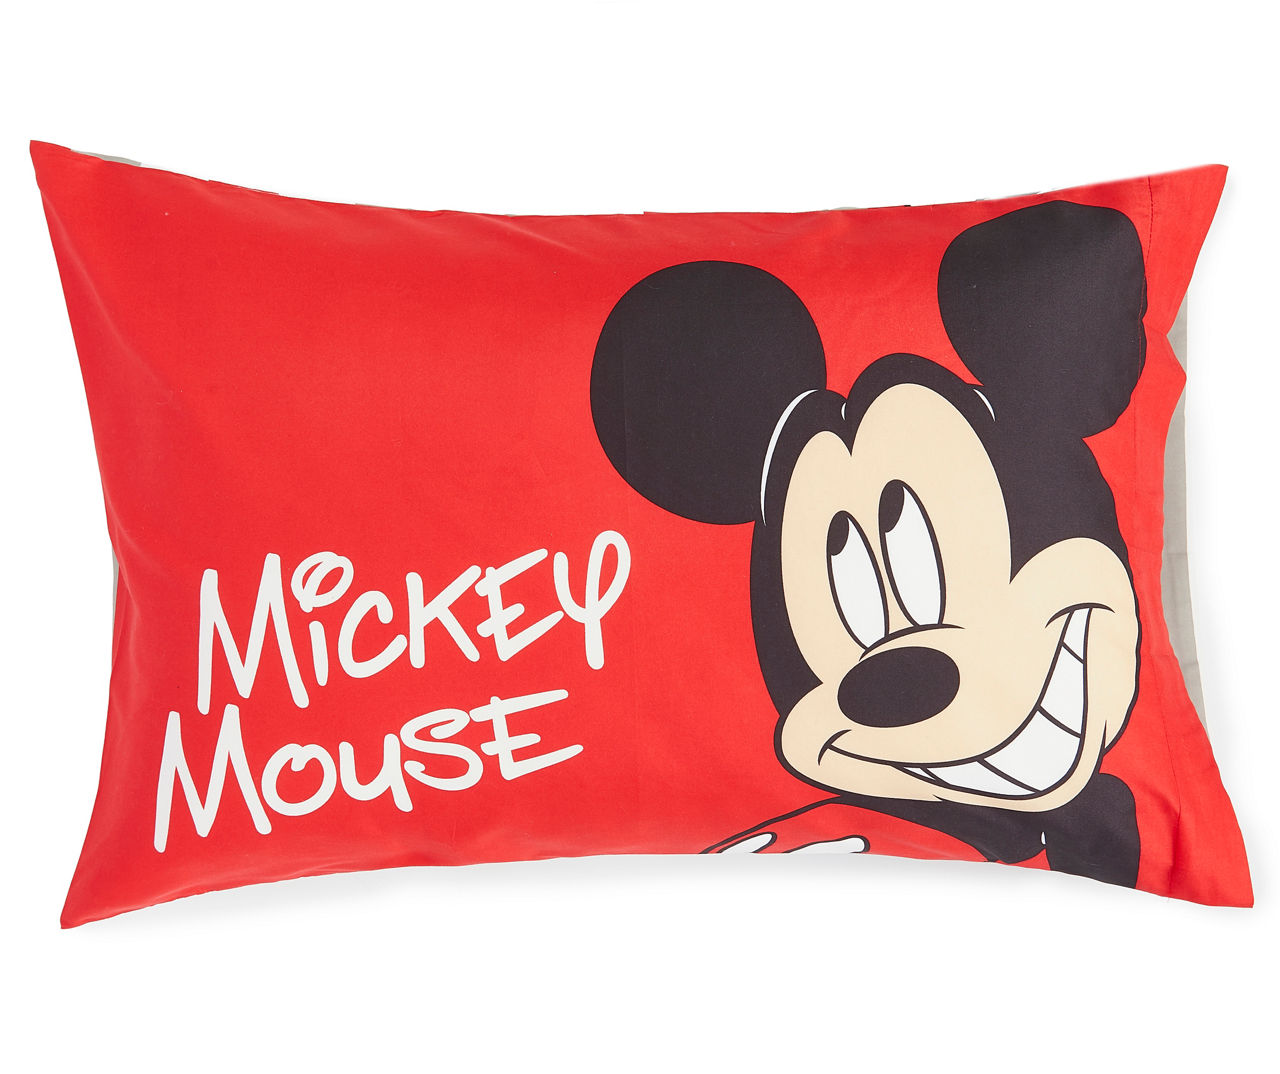 Disney Mickey Mouse Red Peekaboo 20x54 inch Body Pillow Cover, 100